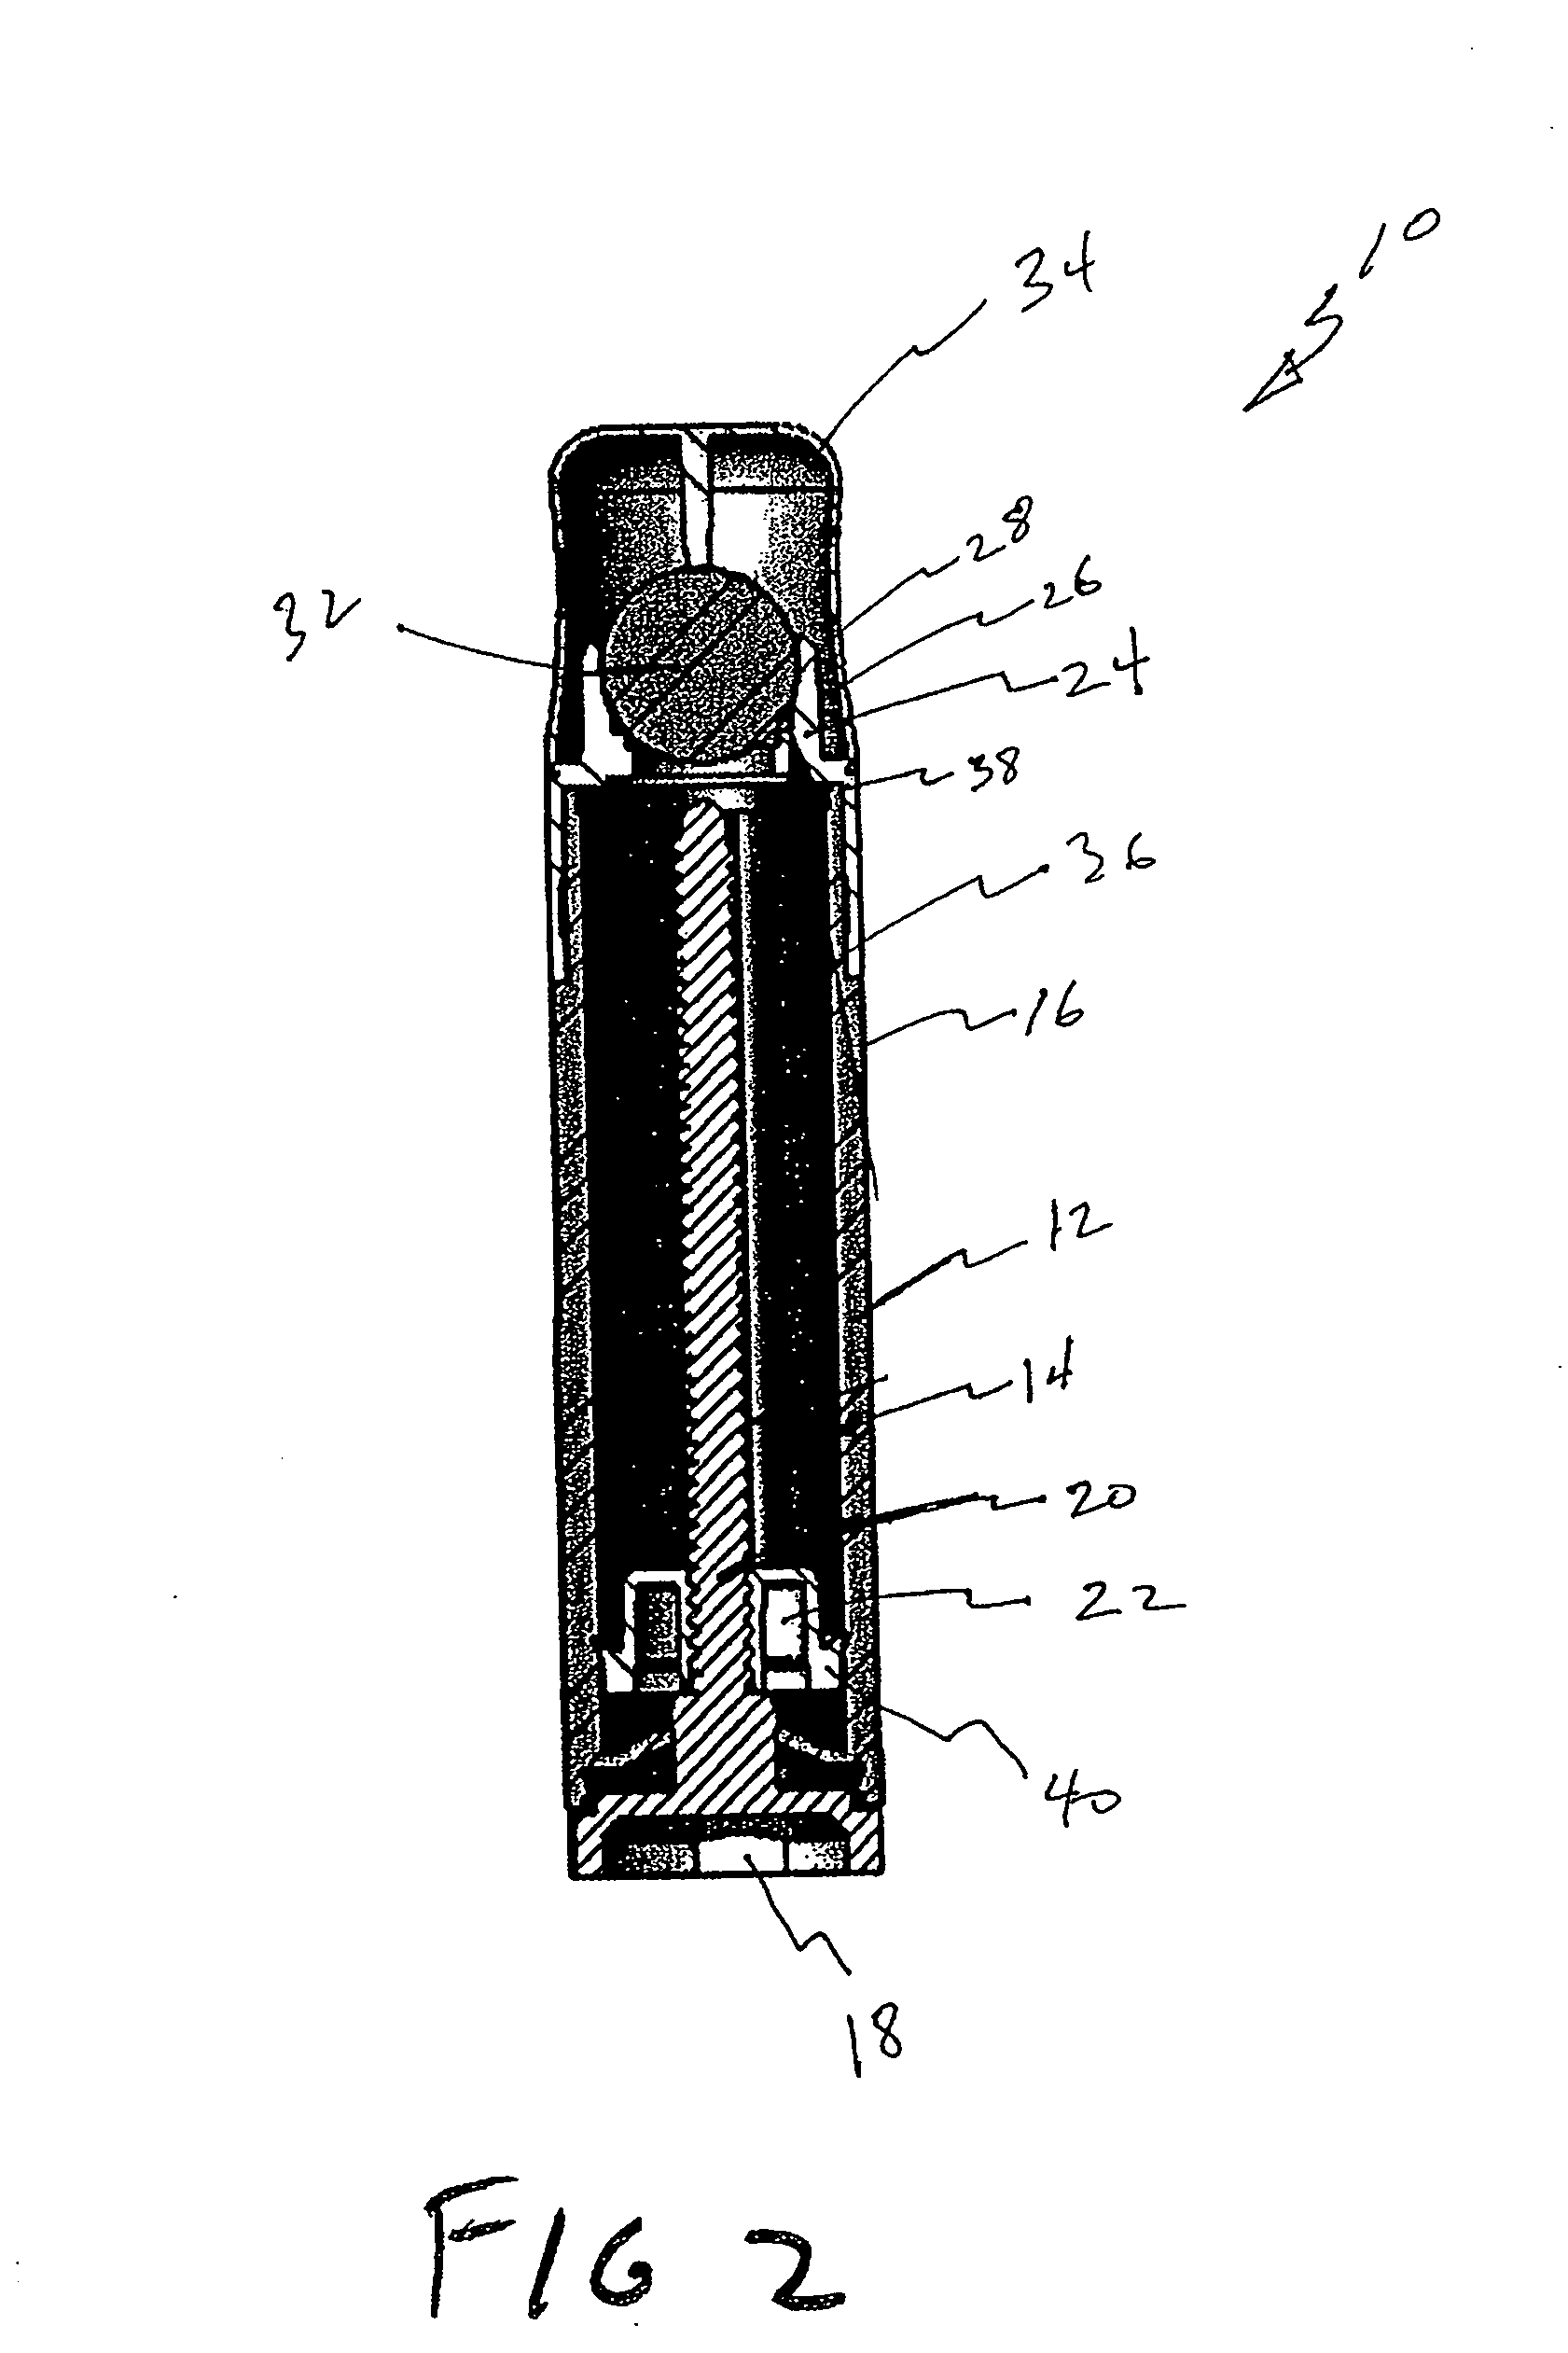 Fluid applicator device and method of using same